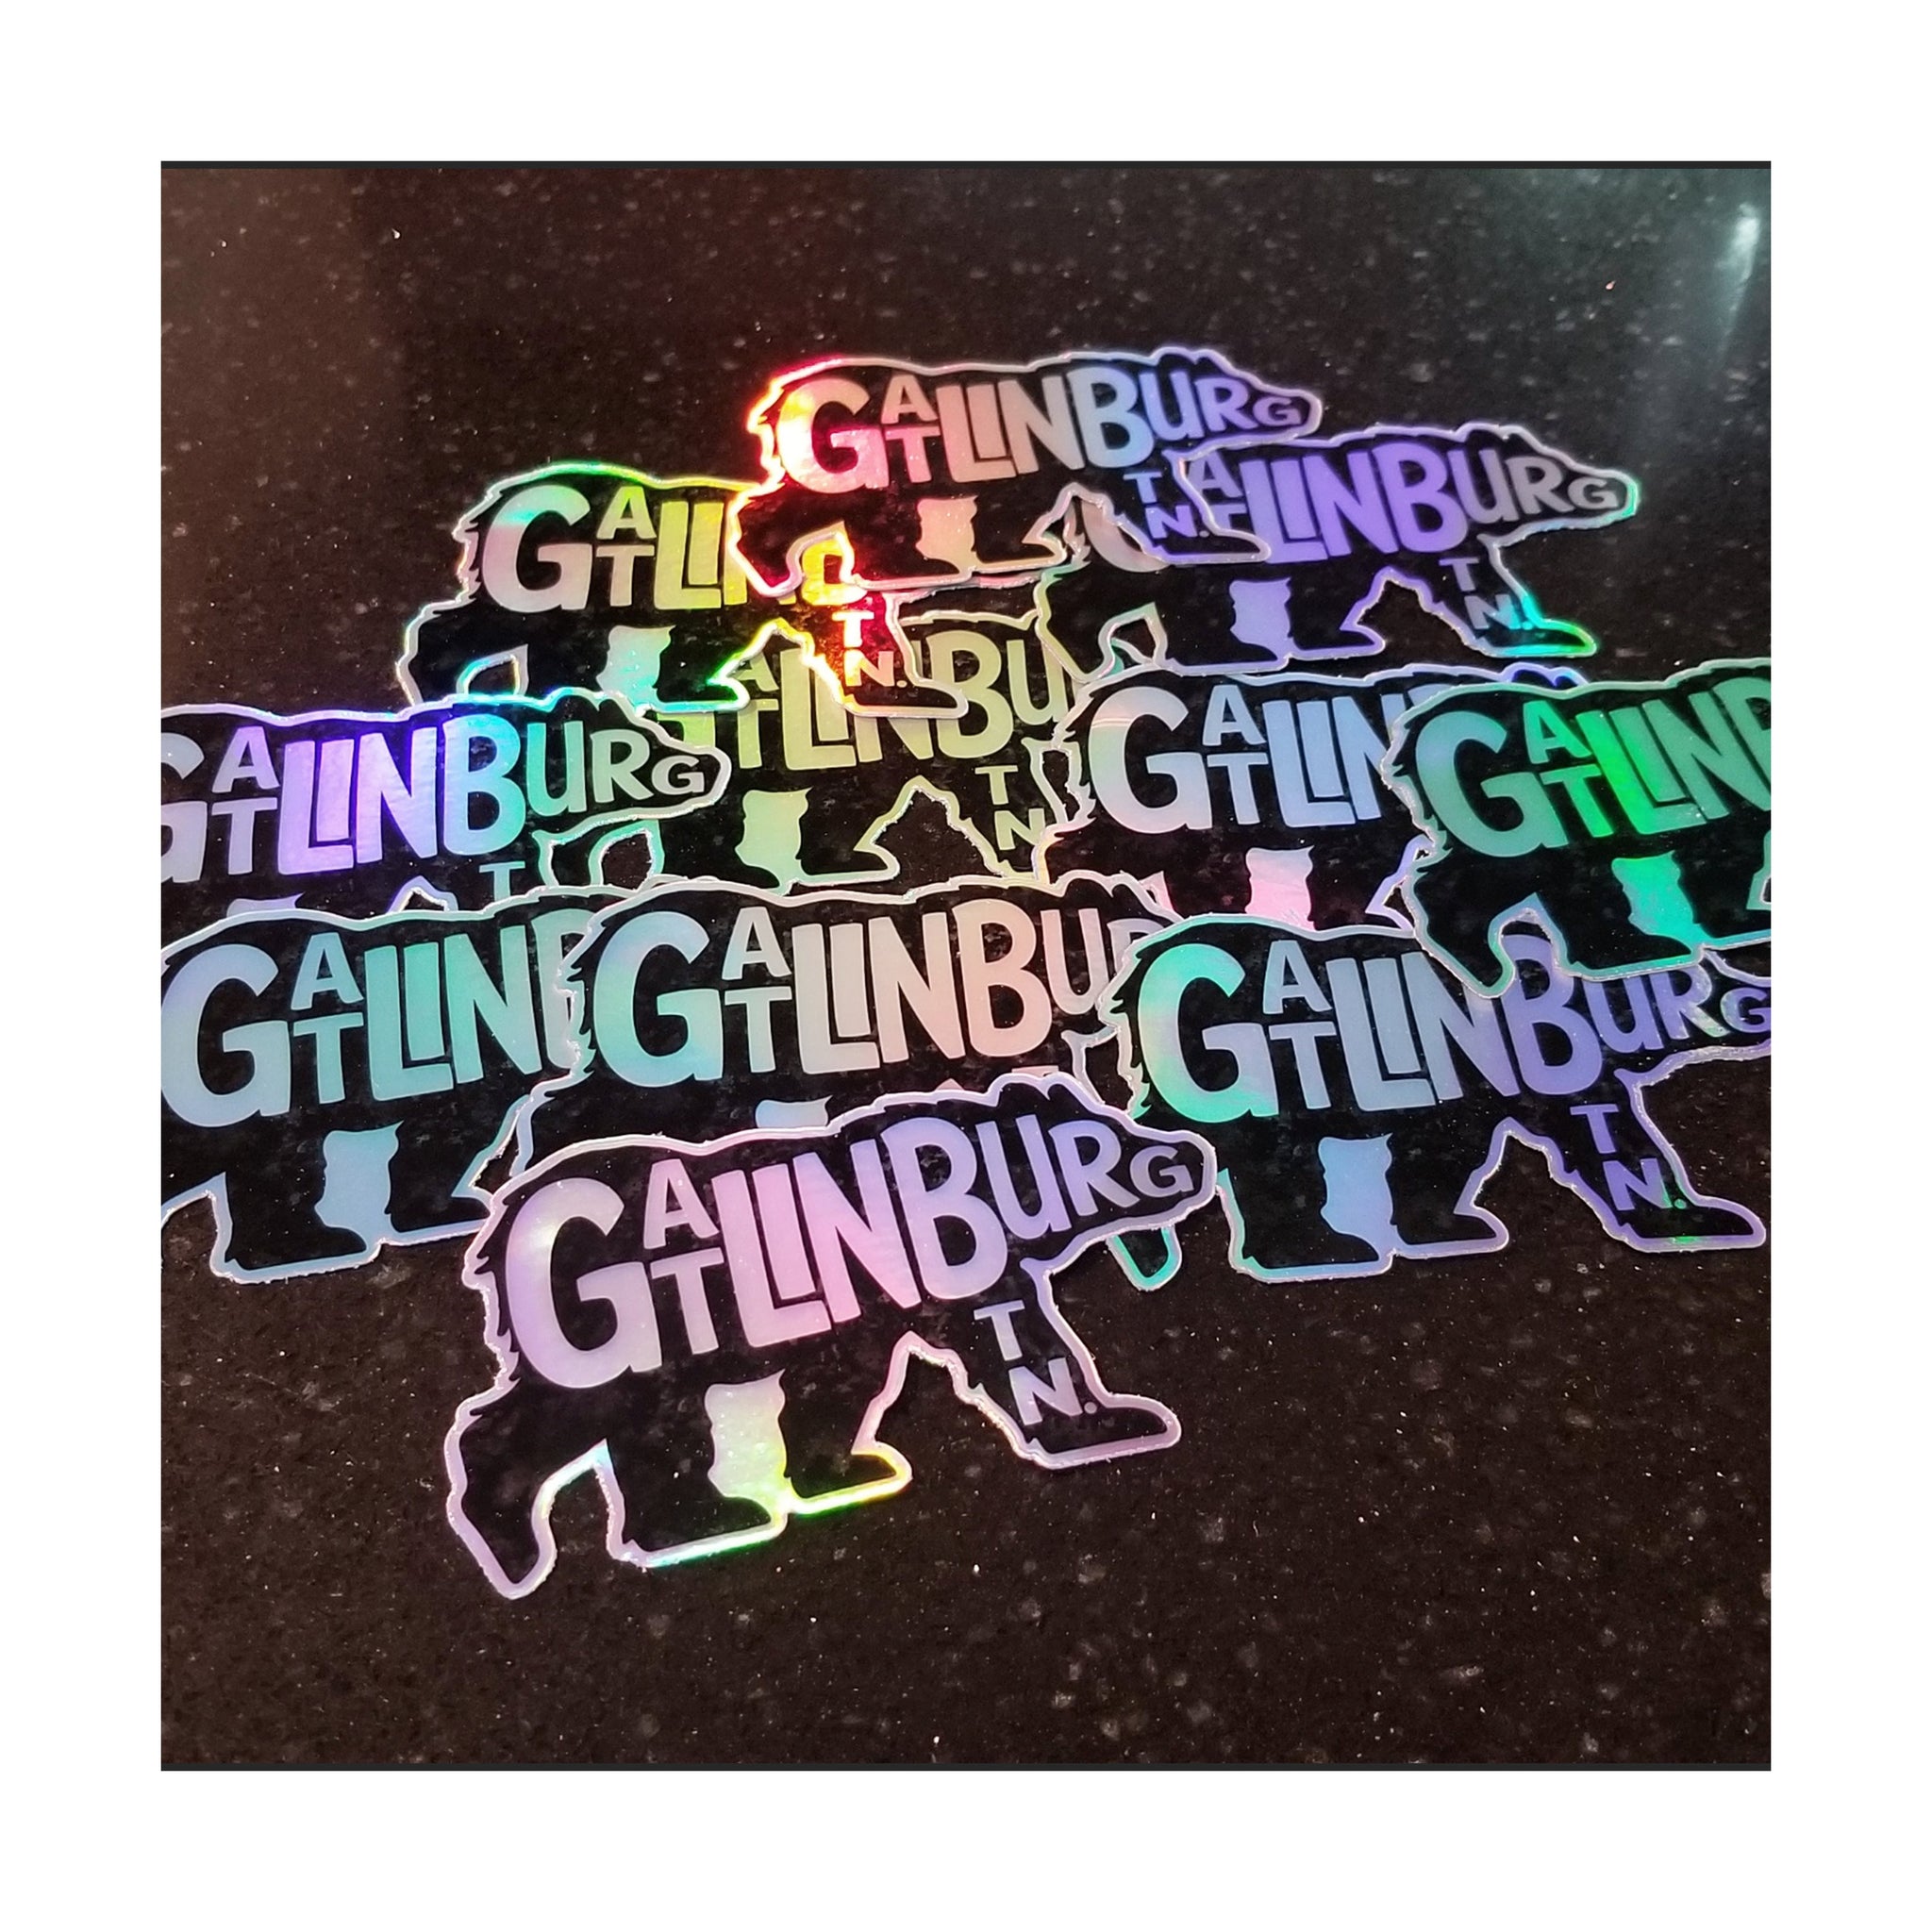 Gatlinburg Tennessee Hologram Decal Sticker Holographic 3.75" Great Smoky Mountains Bear National Park